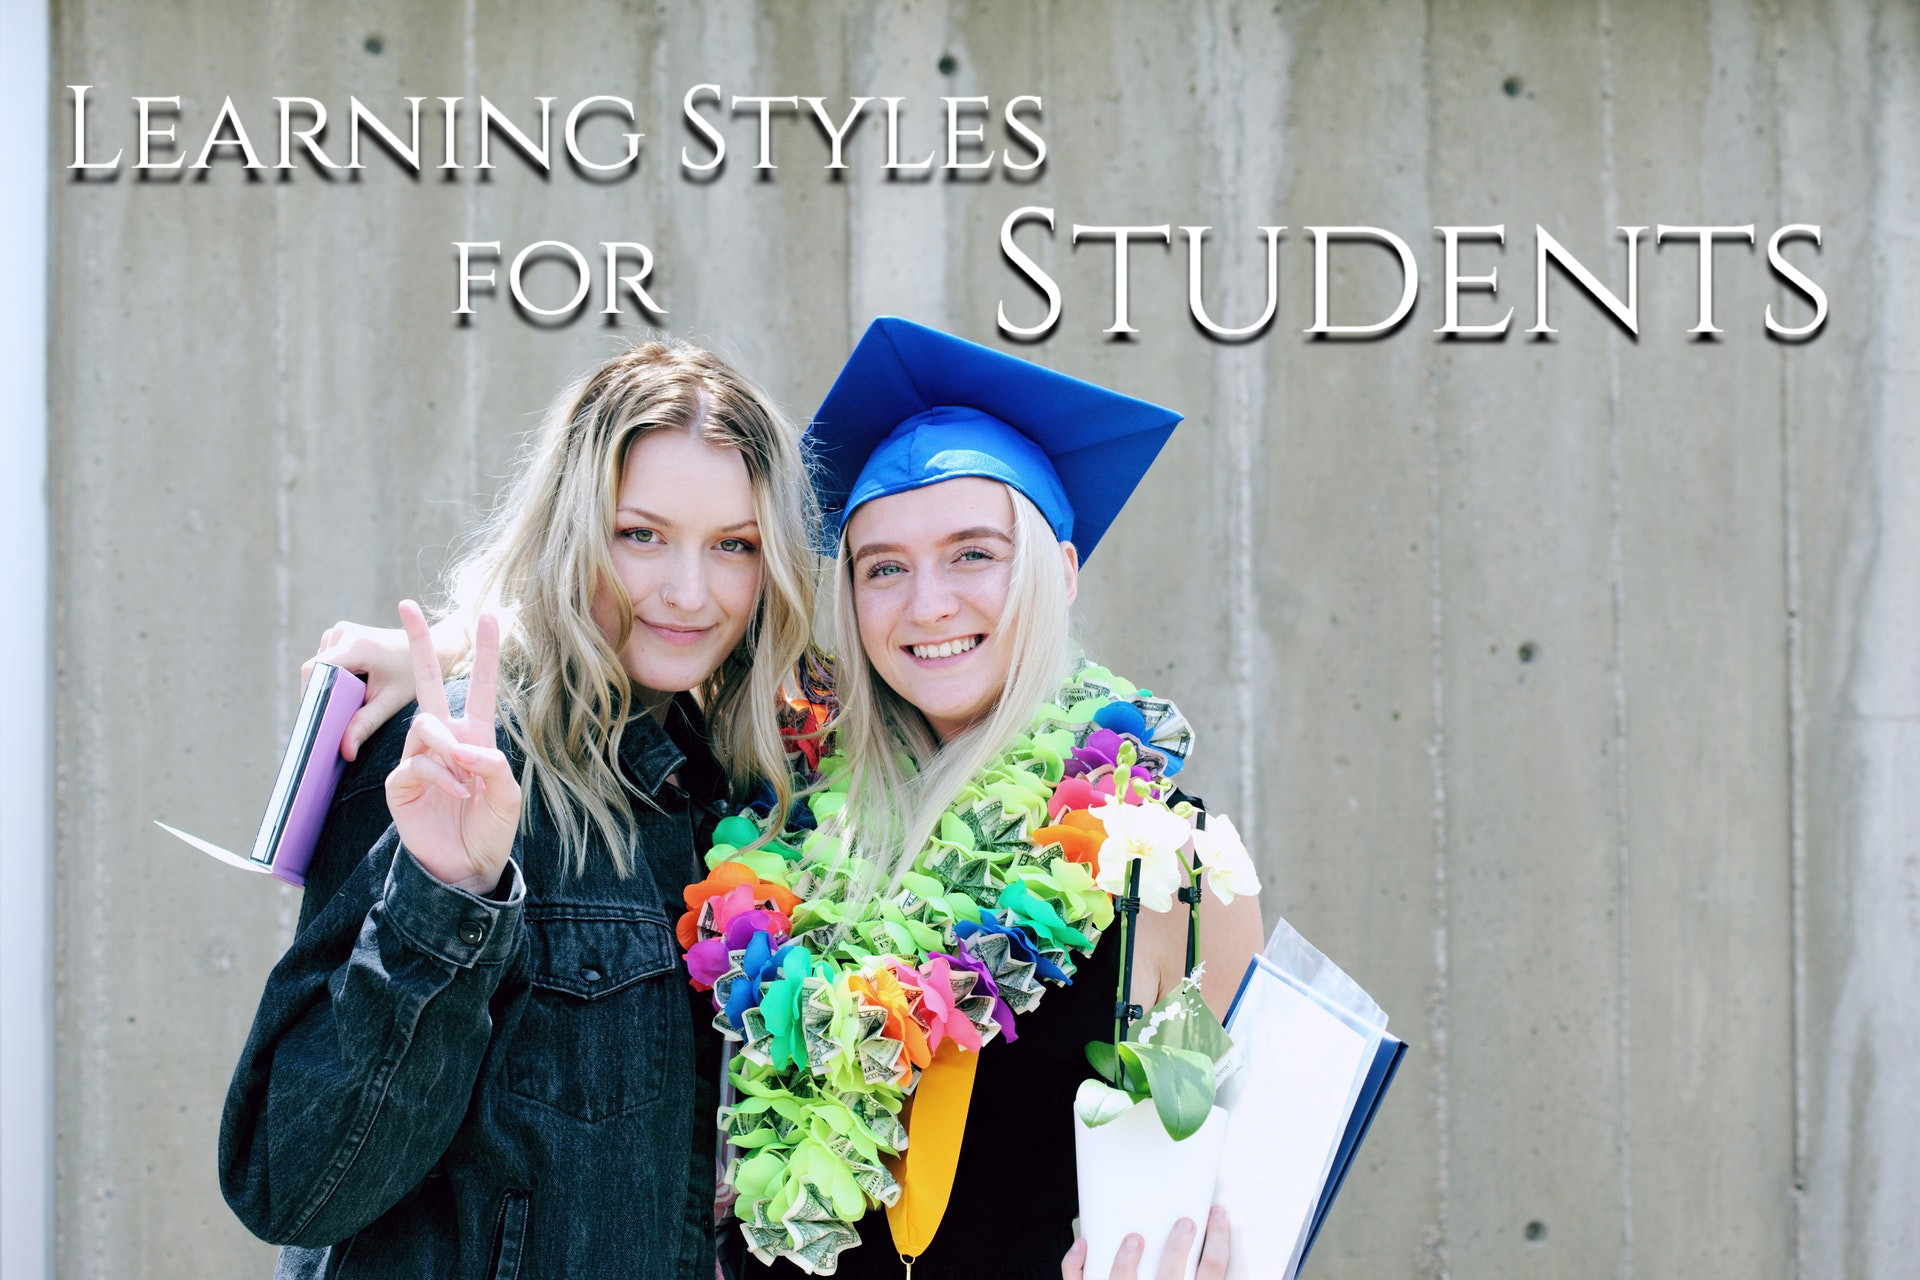 student learning styles,learning style quiz,learning styles,thinking styles,visual learning style,learning style assessment,learning style theory,type of learner test,multiple intelligences learning styles